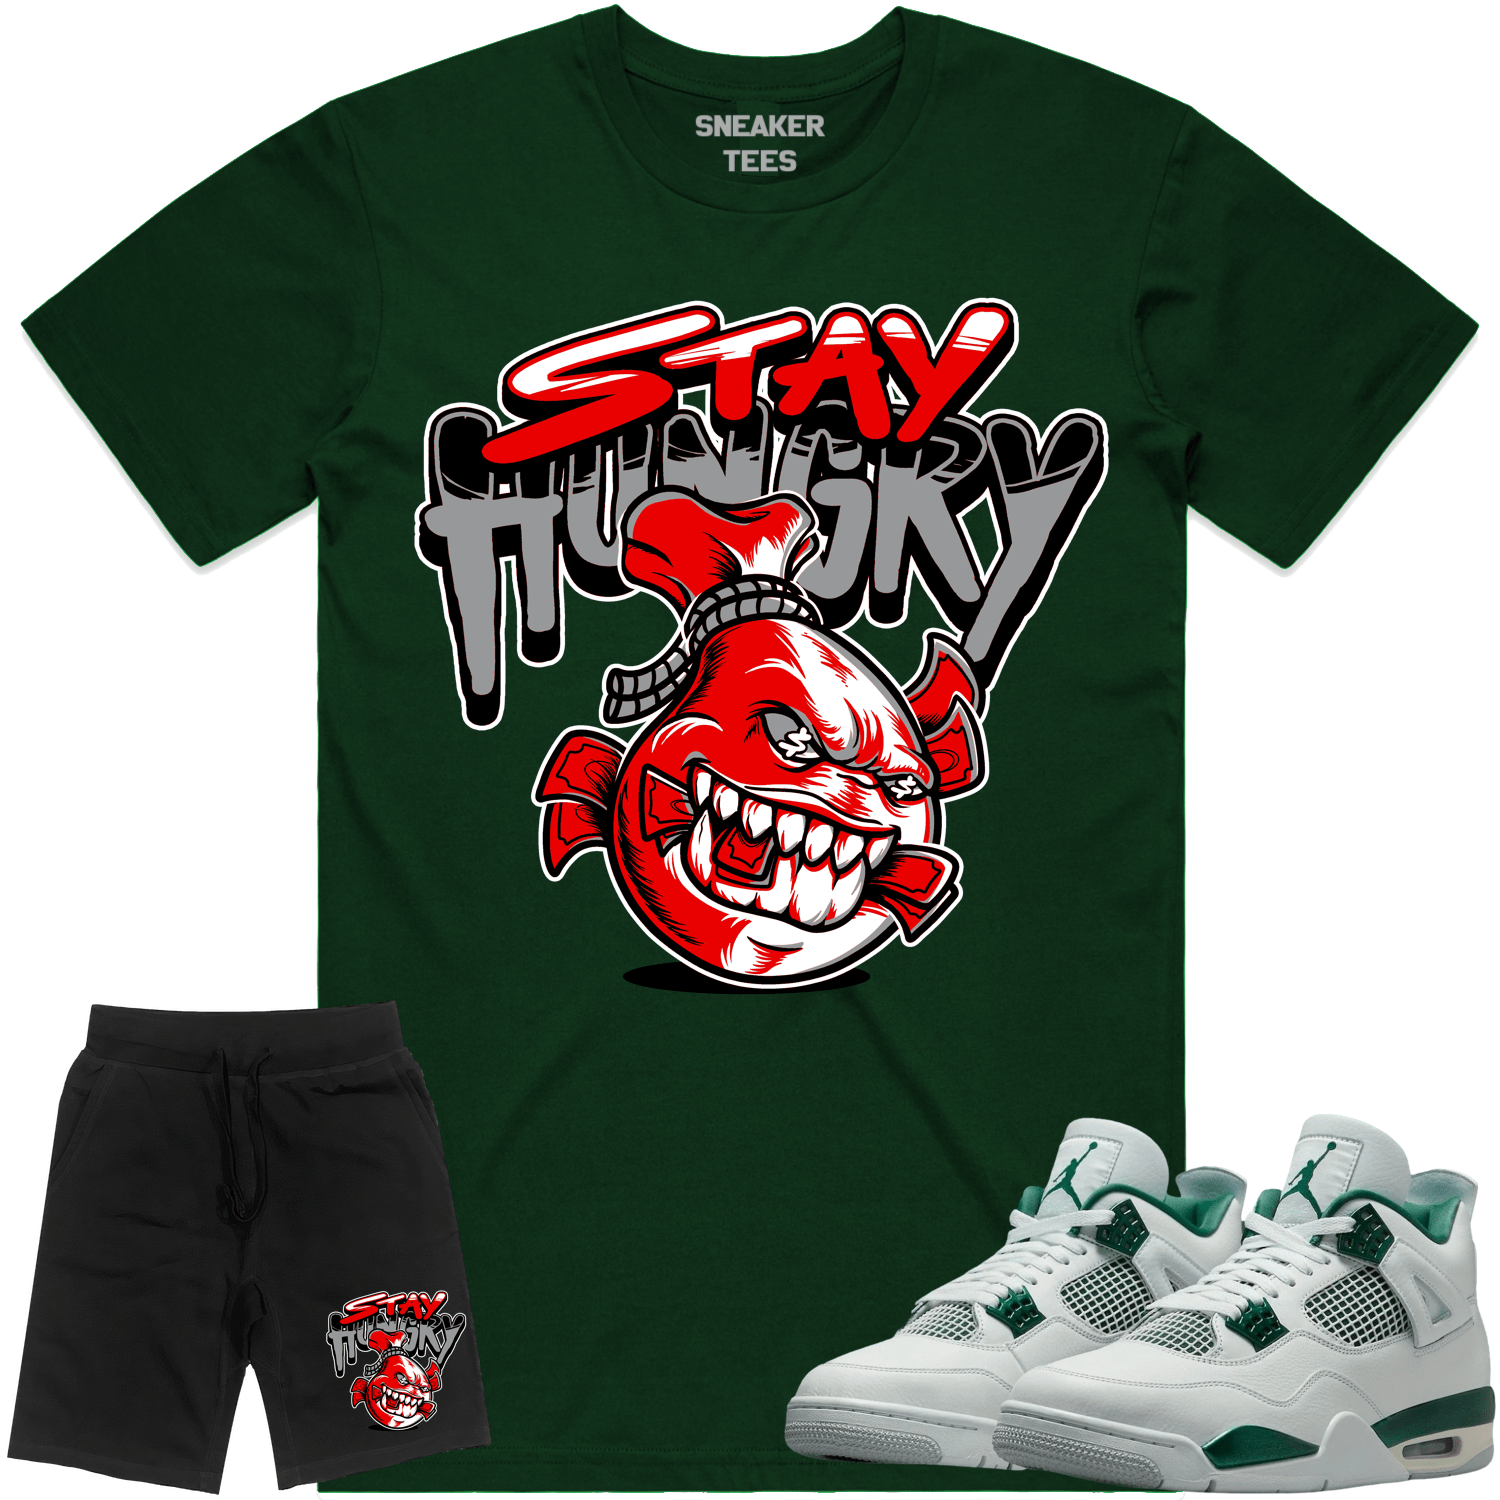 Oxidized Green 4s Sneaker Outfits - Shirt and Shorts - Stay Hungry